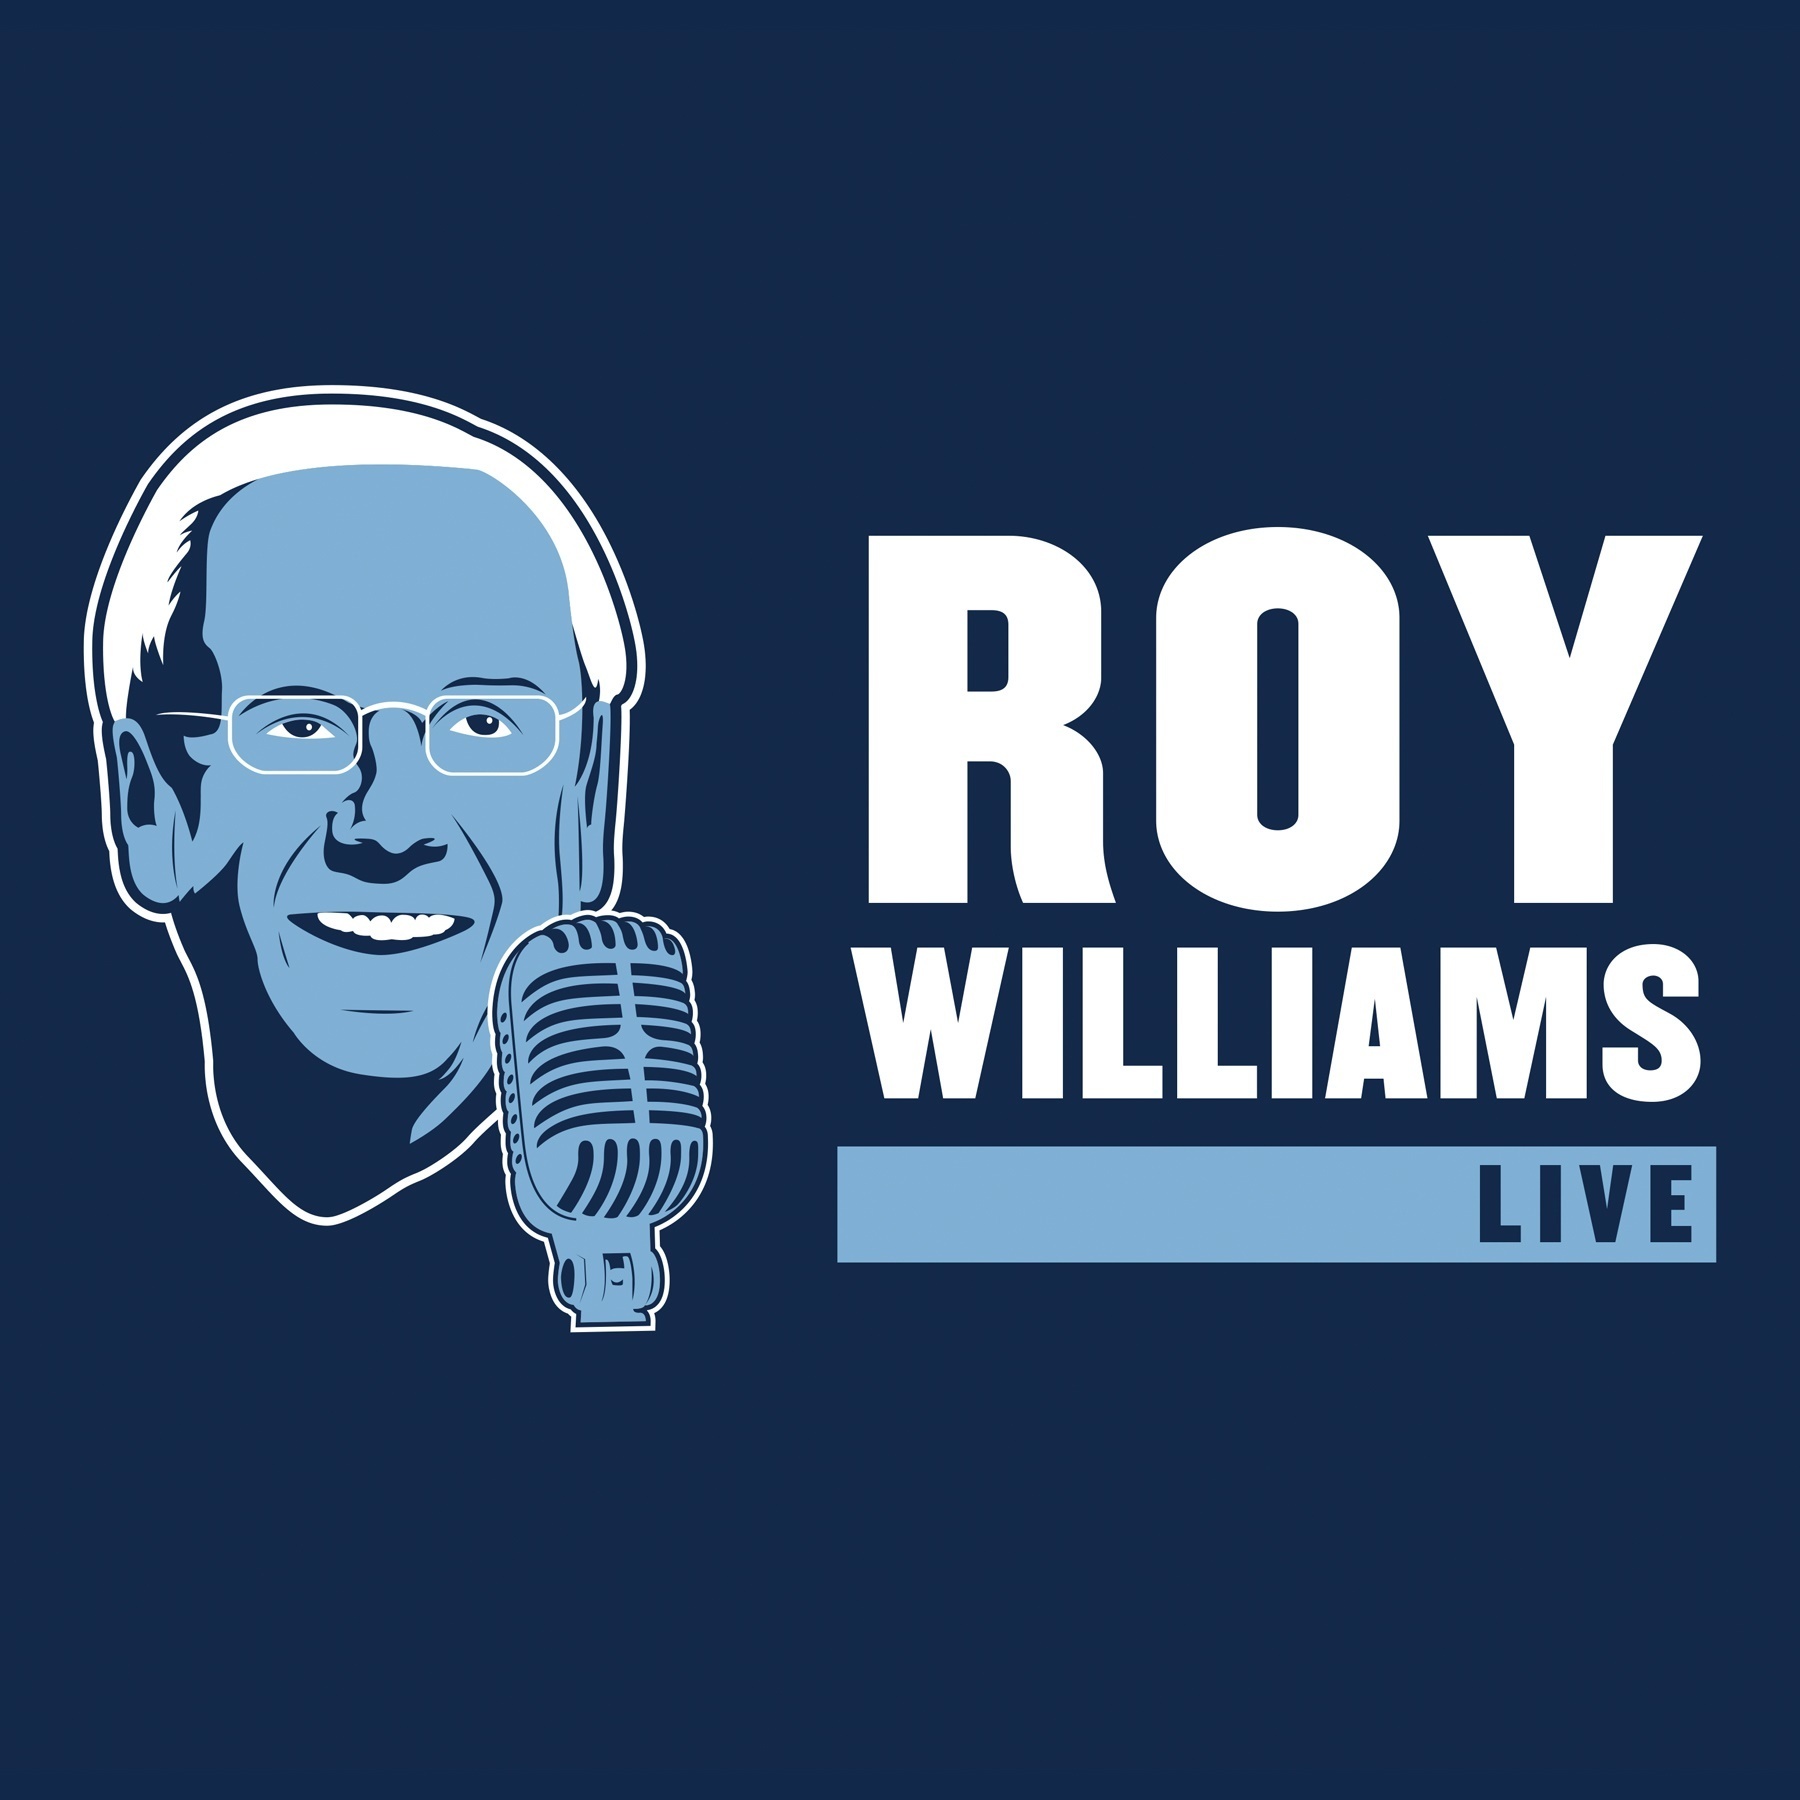 Roy Williams Live from 1-23-18